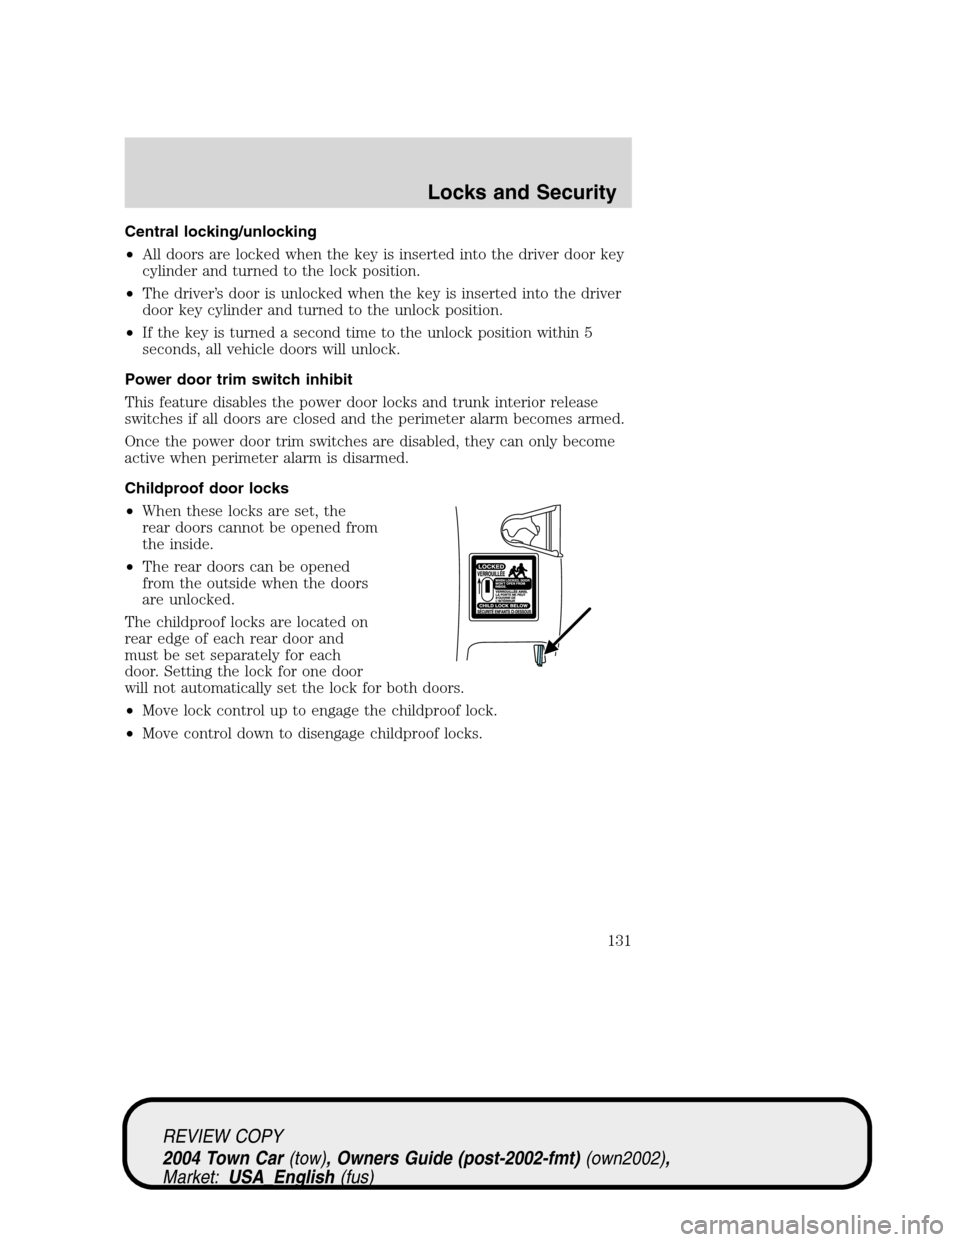 LINCOLN TOWN CAR 2004  Owners Manual Central locking/unlocking
•All doors are locked when the key is inserted into the driver door key
cylinder and turned to the lock position.
•The driver’s door is unlocked when the key is inserte